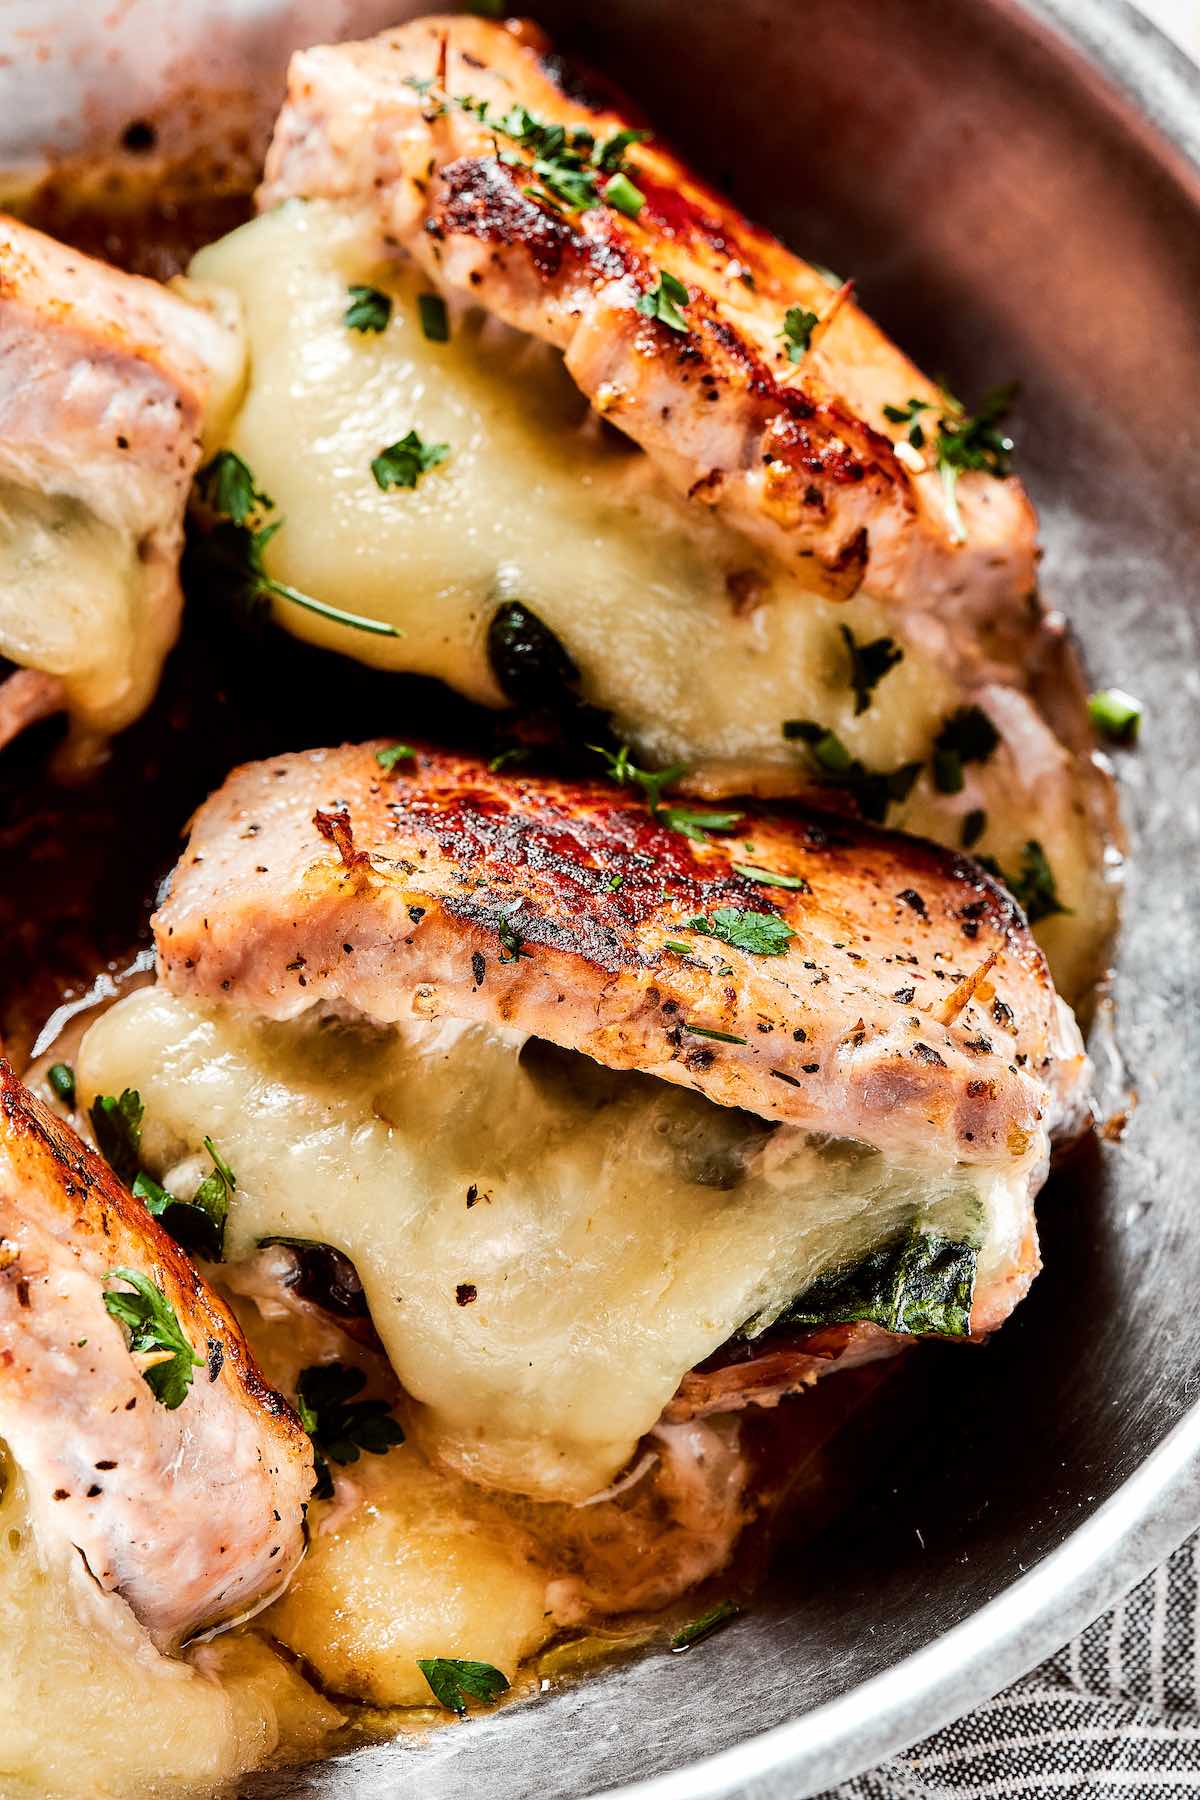 pork chops stuffed with spinach and cheese.